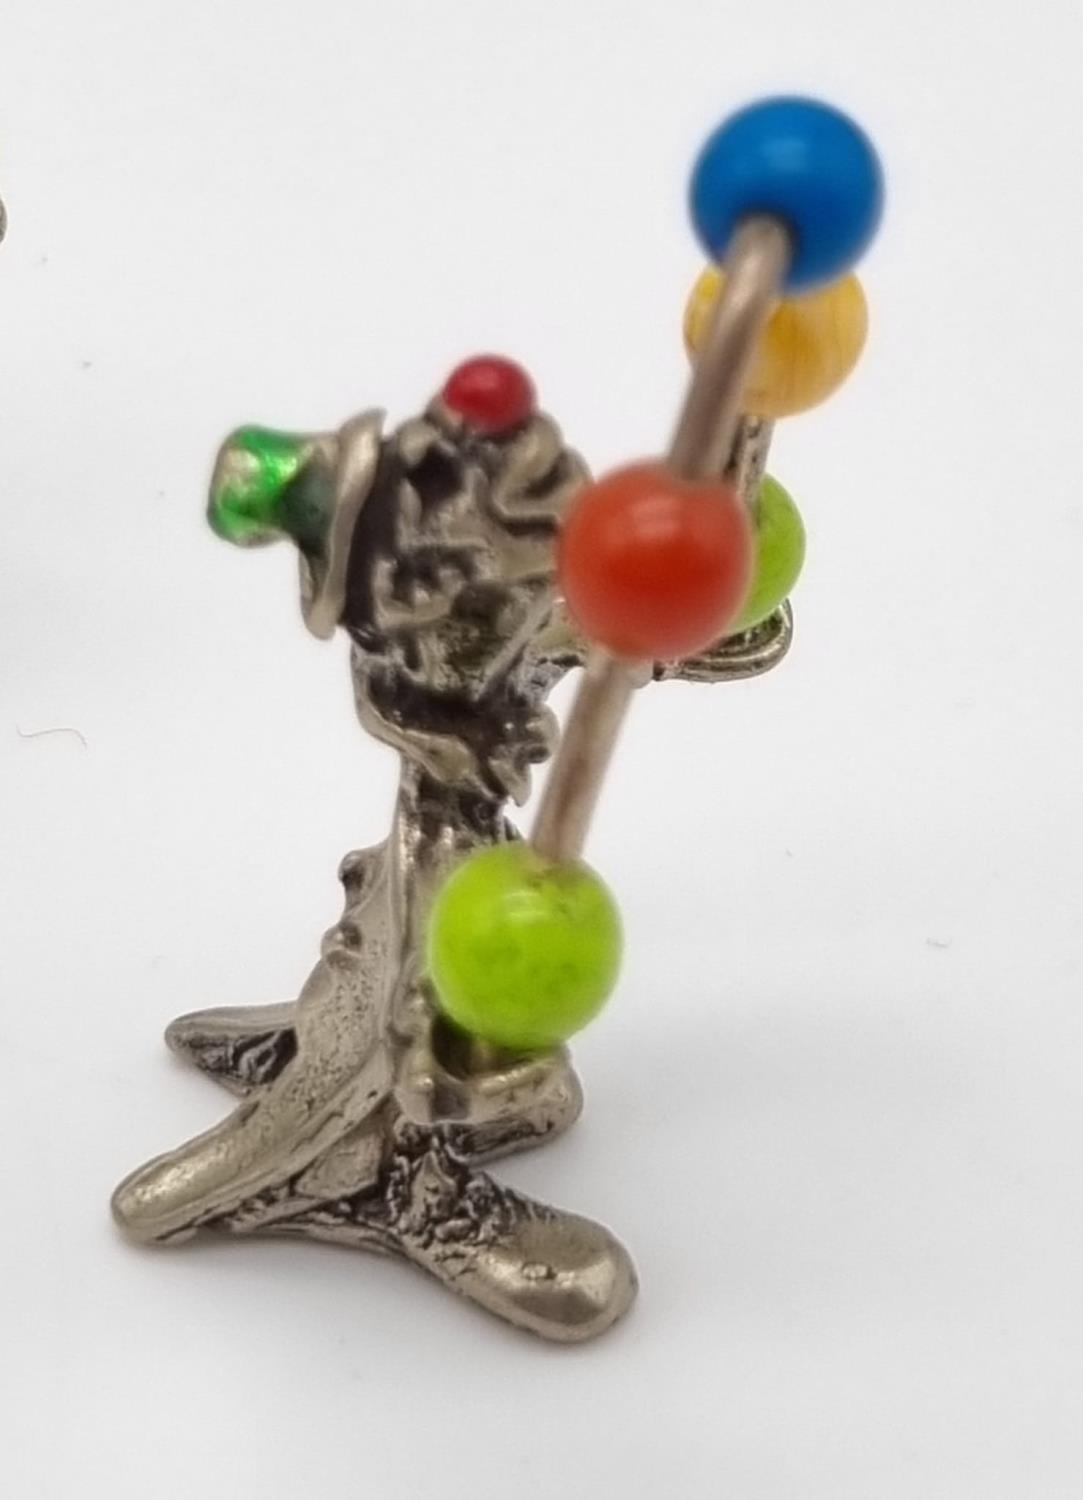 Six Vintage Silver and Enamel Italian Clown Figurines in Various Activities. 77g total weight. - Image 4 of 9